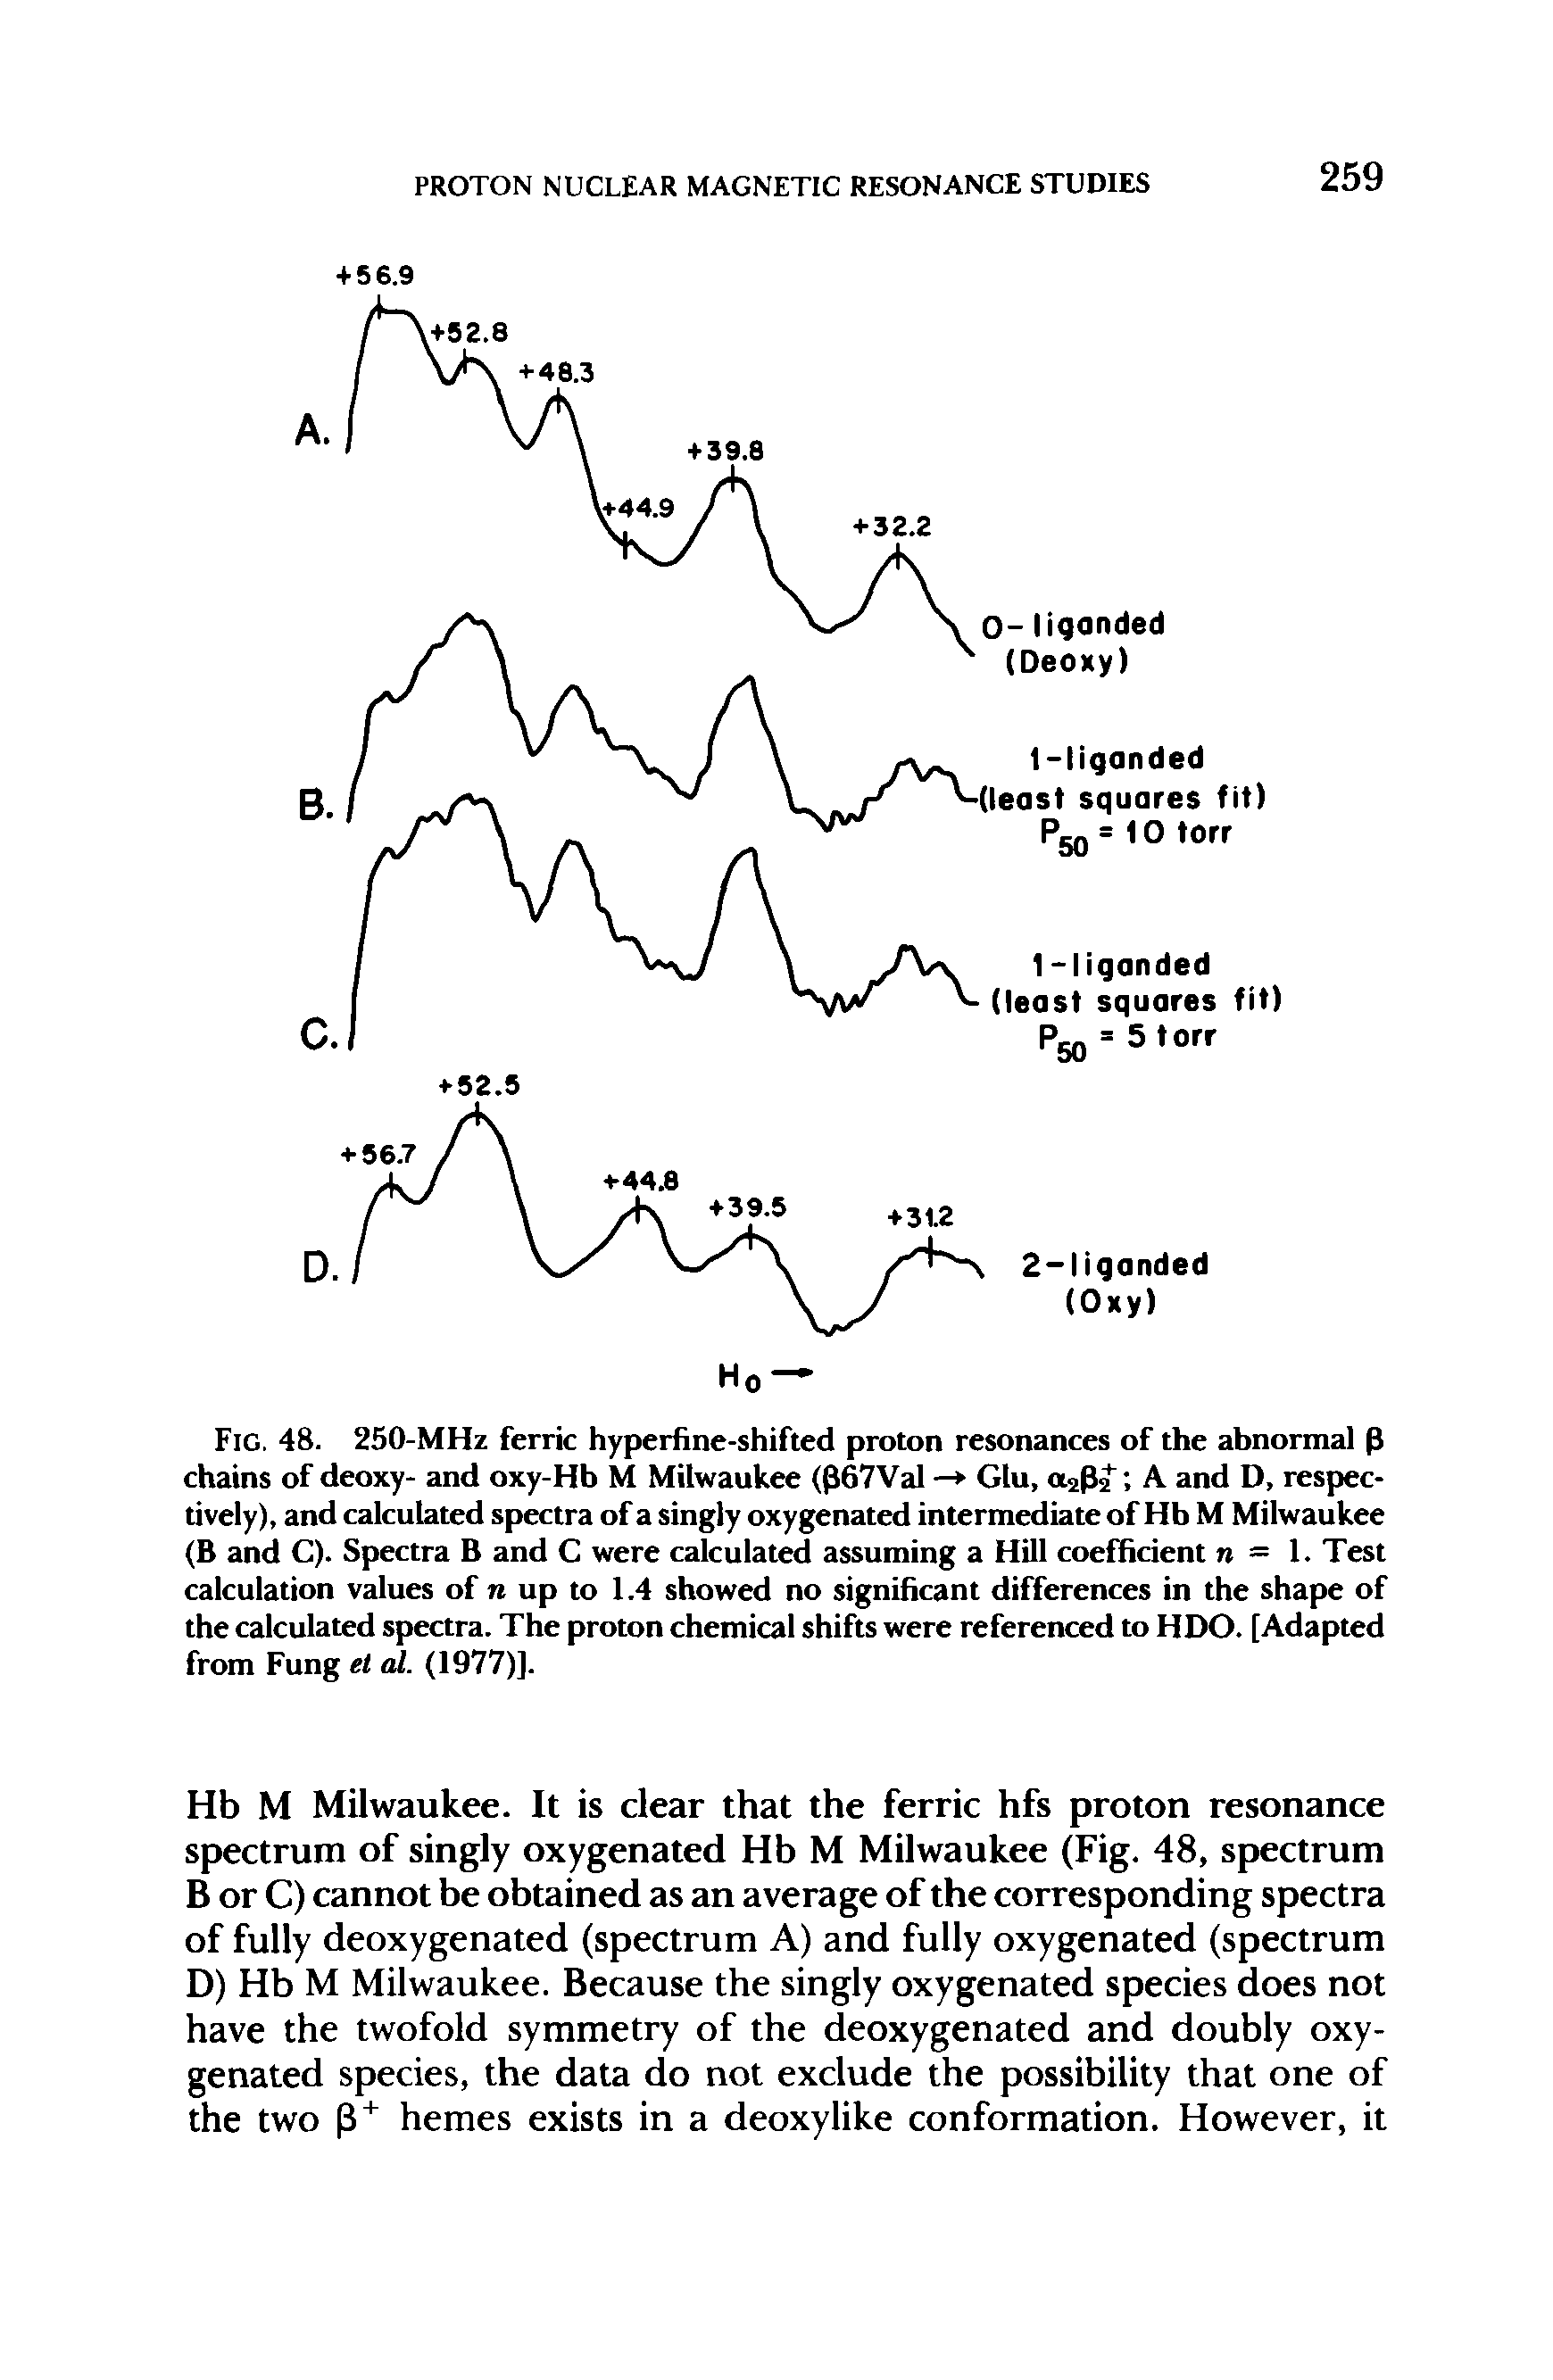 Fig. 48. 250-MHz ferric hyperfine-shifted proton resonances of the abnormal (3 chains of deoxy- and oxy-Hb M Milwaukee ((367 Val — Glu, a2(3 A and D, respectively), and calculated spectra of a singly oxygenated intermediate of Hb M Milwaukee (B and C). Spectra B and C were calculated assuming a Hill coefficient = 1. Test calculation values of n up to 1.4 showed no significant differences in the shape of the calculated spectra. The proton chemical shifts were referenced to HDO. [Adapted from Fung el al. (1977)].